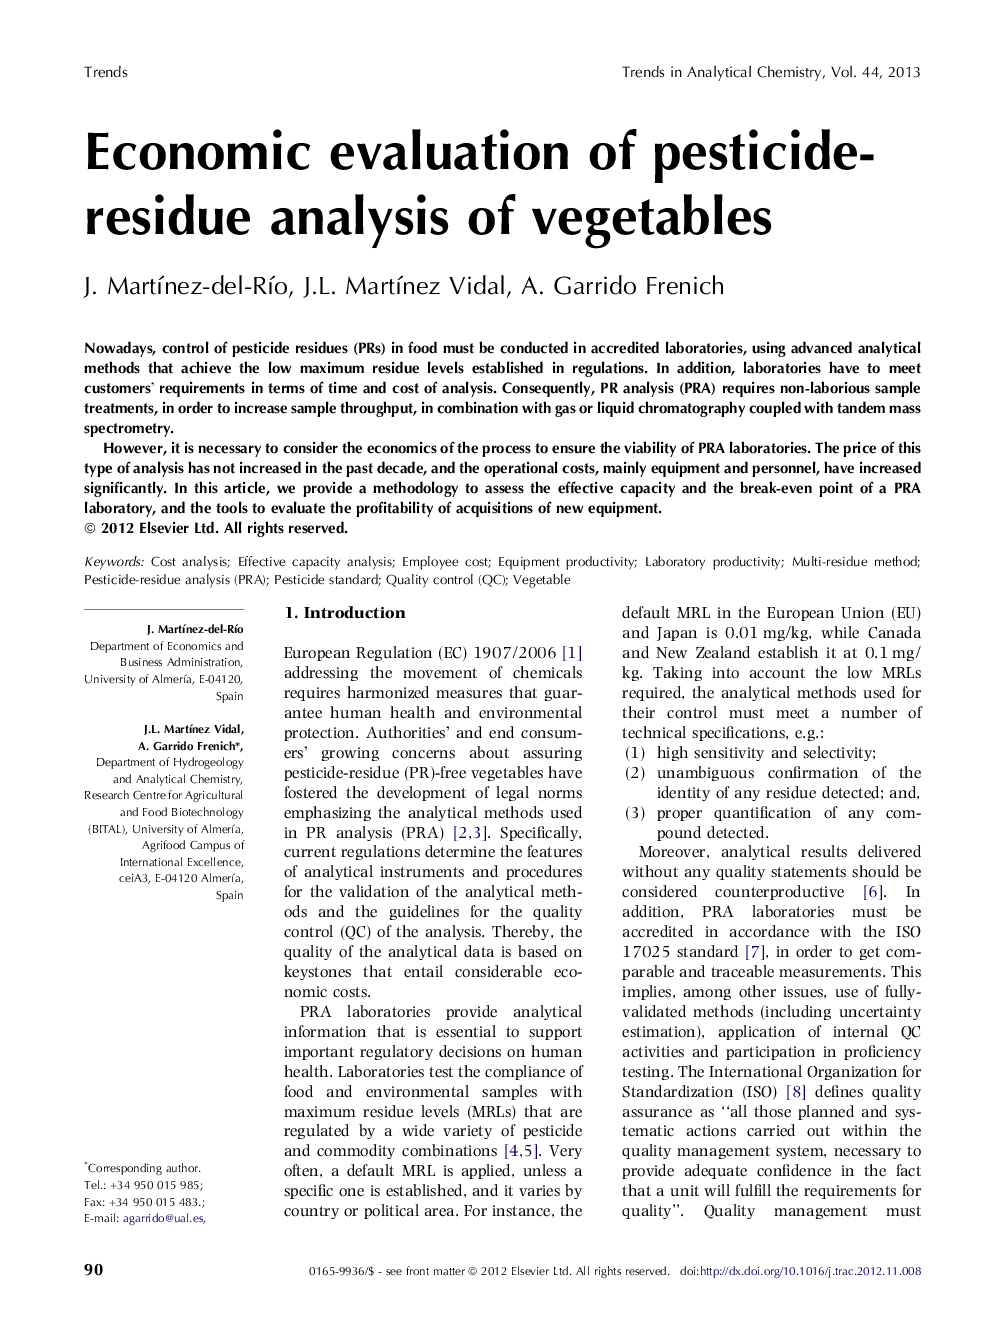 Economic evaluation of pesticide-residue analysis of vegetables